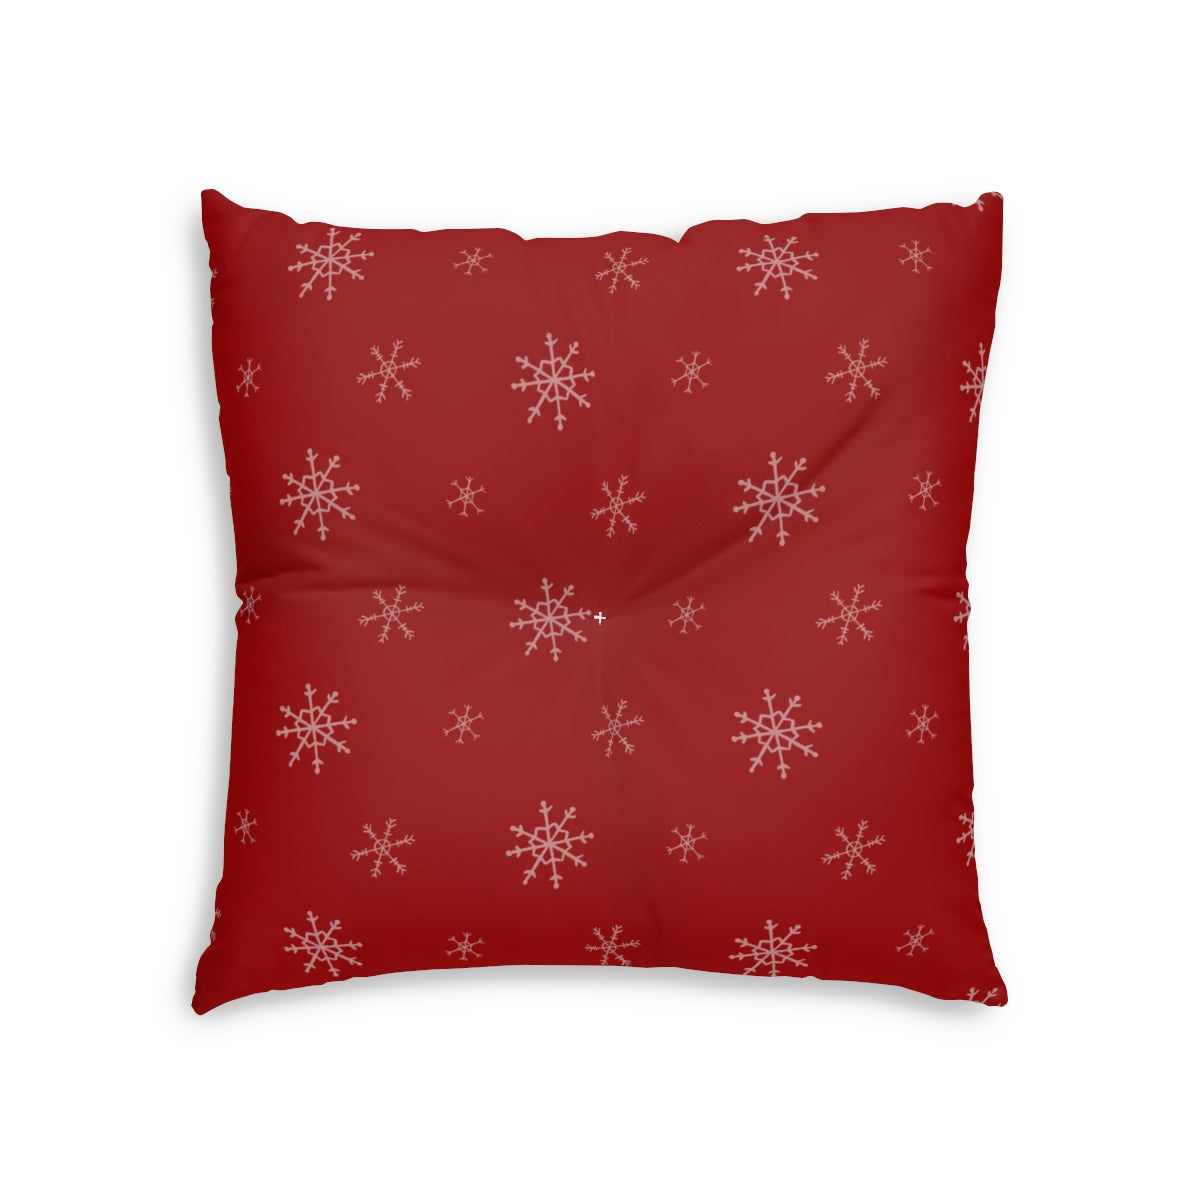 Lifestyle Details - Red Square Tufted Holiday Floor Pillow - Snowflakes -  26x26 - Front View